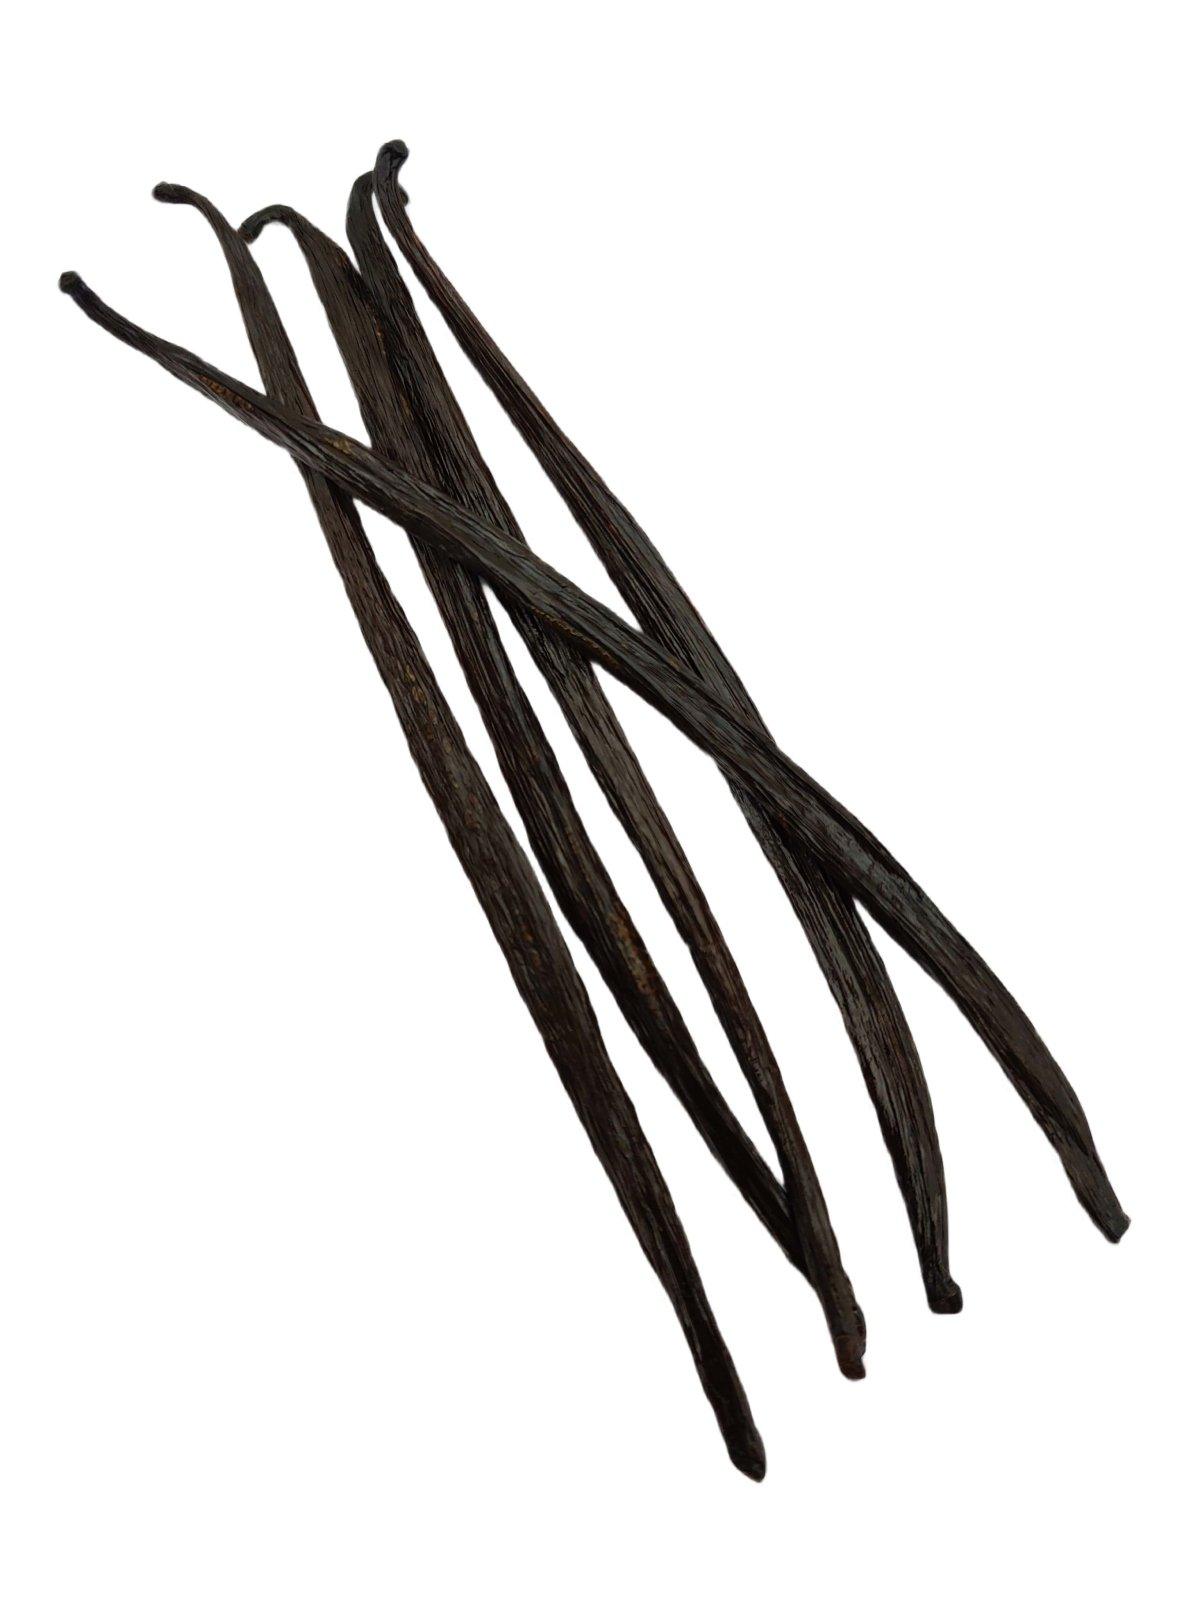 Indonesian Planifolia Gourmet Grade-A Vanilla Beans<br>For Extract And Baking<BR>5 count, 15 count, 25 count, 50 count, 100 count - Spice-Land Wholesale